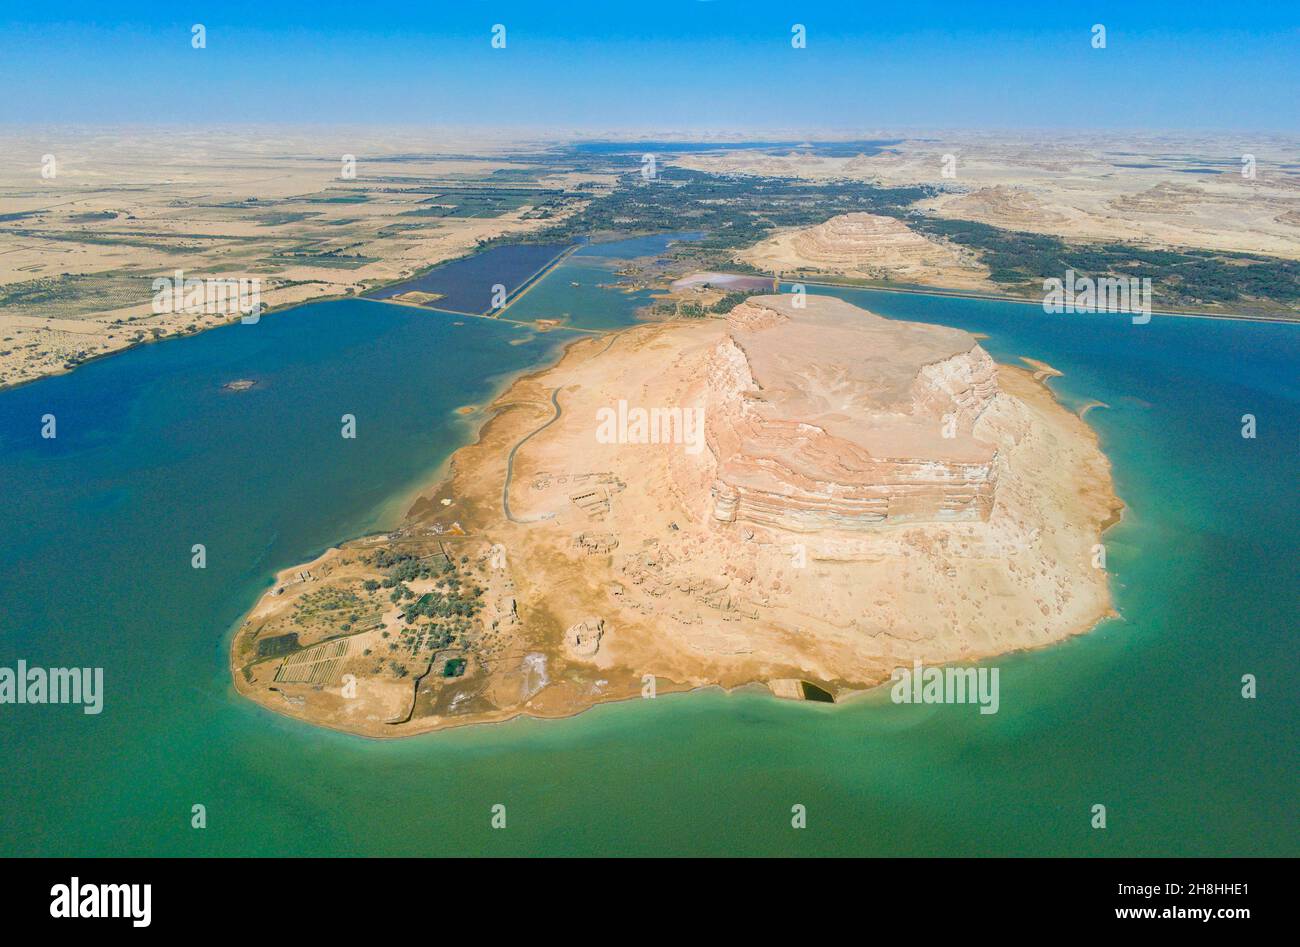 Egypt, Lybian desert, governorate of Marsa Matruh, Siwa oasis, Adrere Amelall (aerial view) Stock Photo